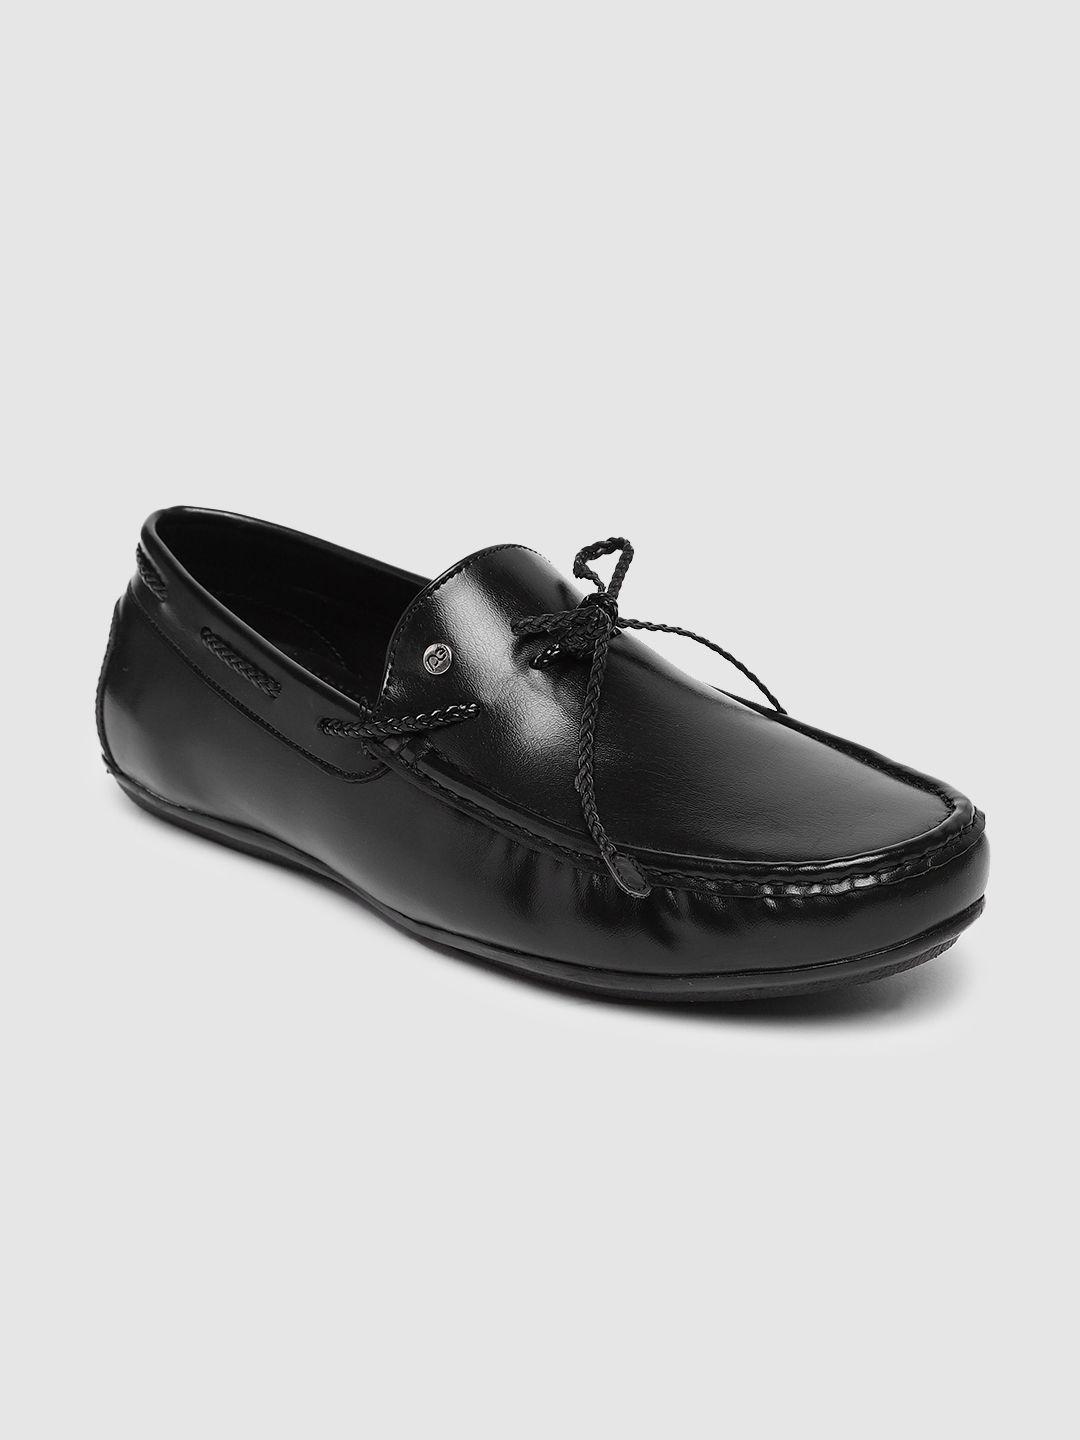 peter-england-men-solid-boat-shoes